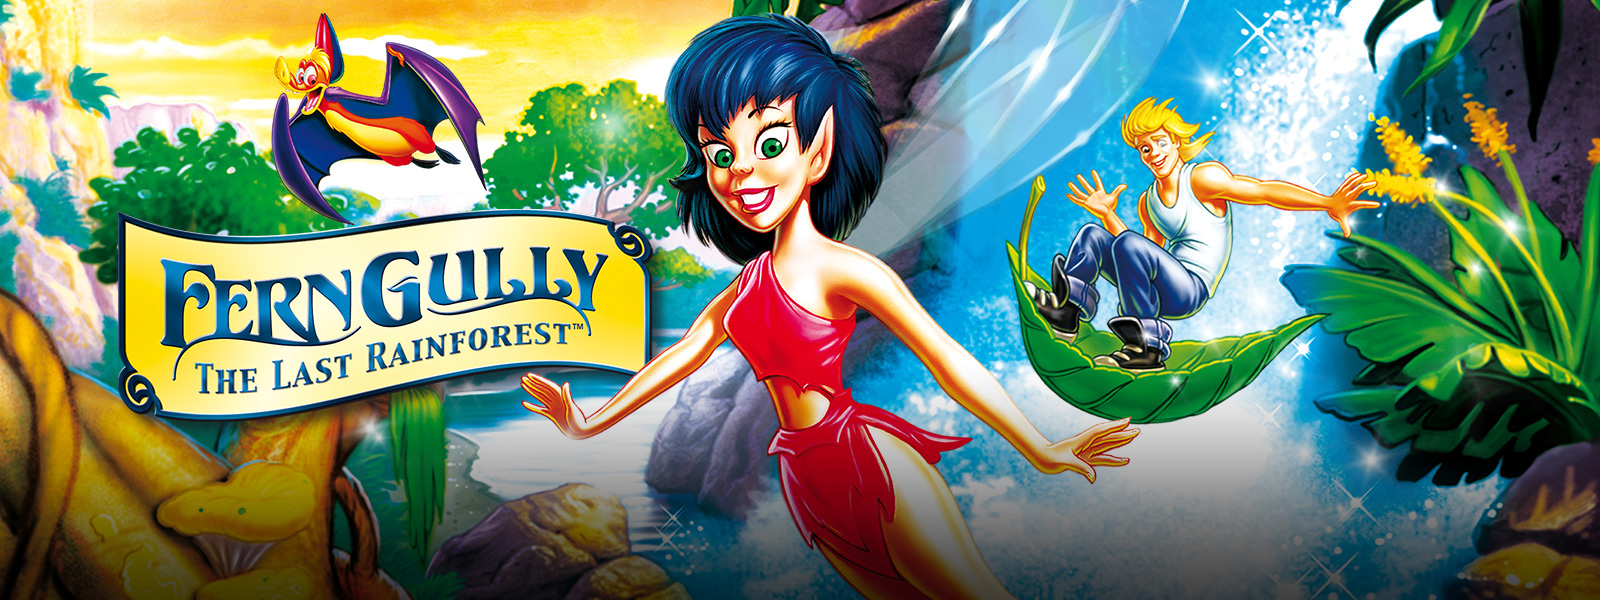 Ferngully: The Last Rainforest #13